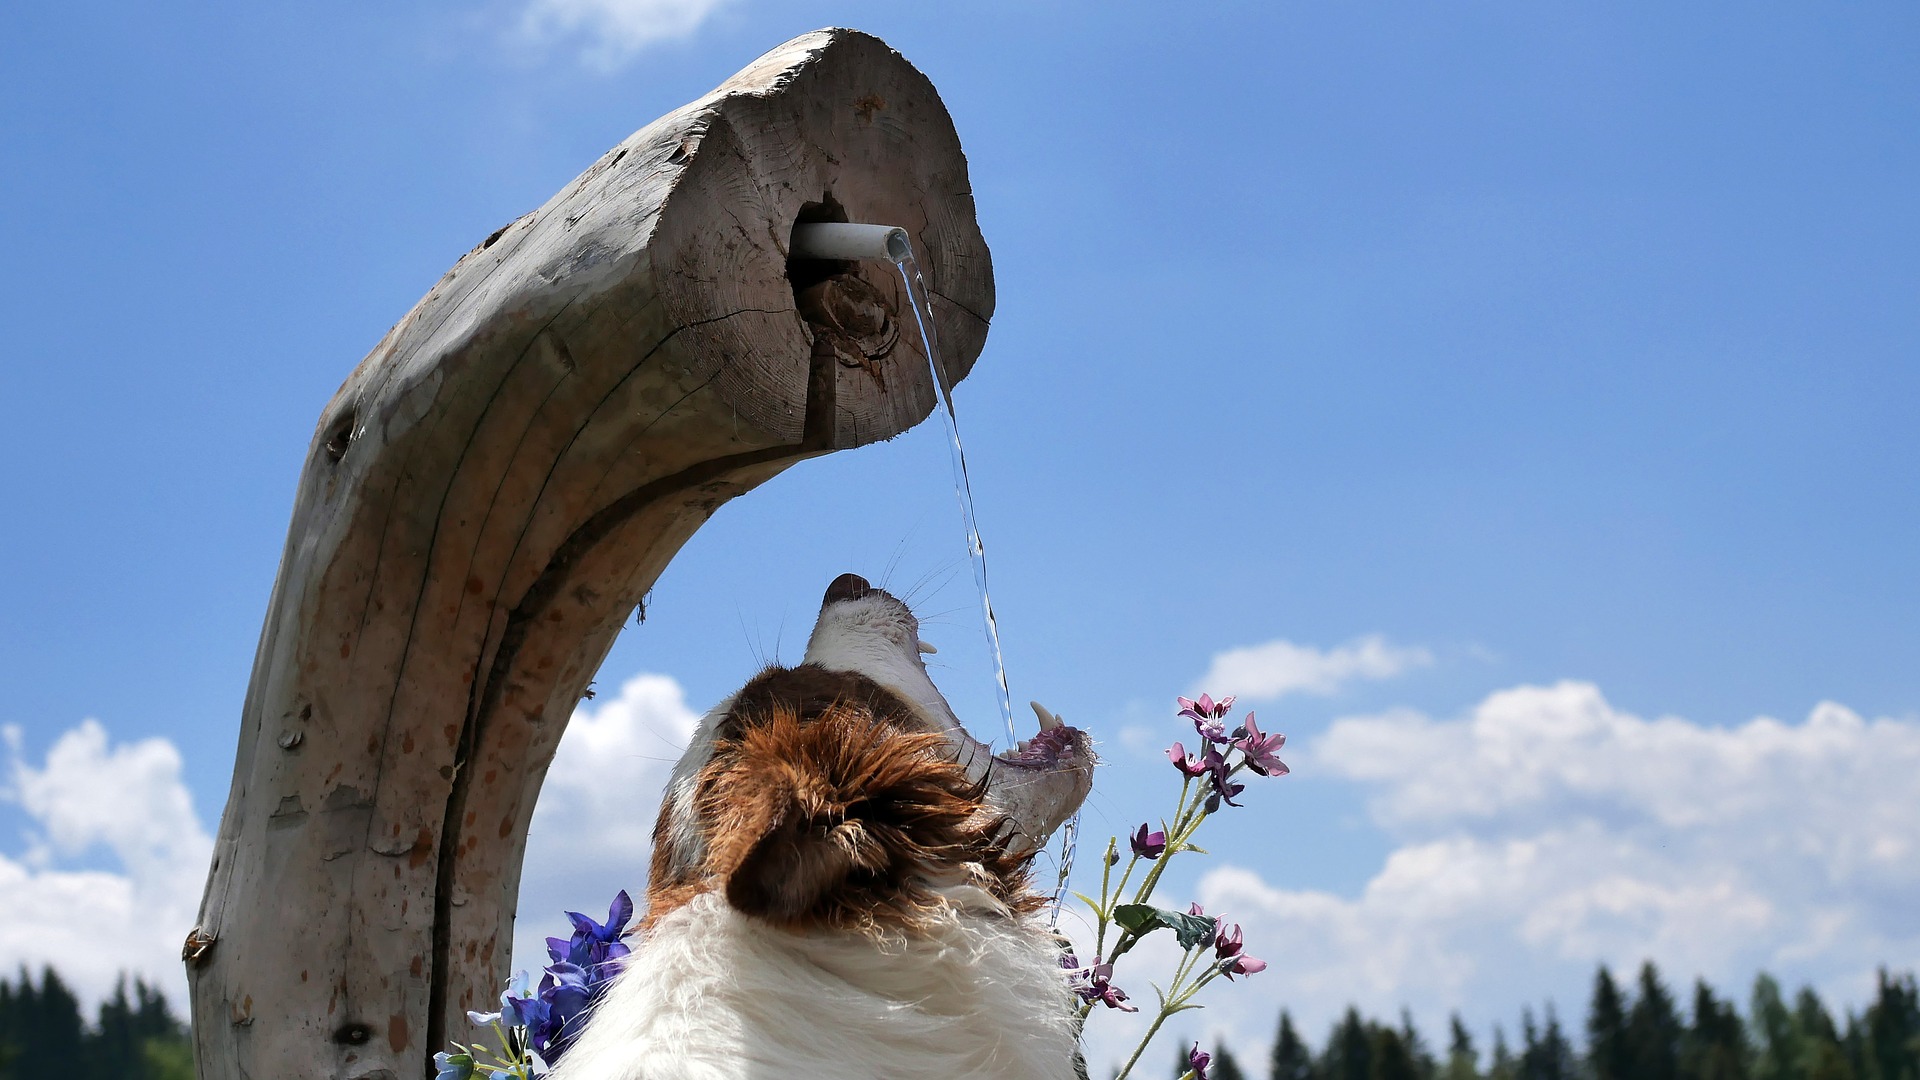 Dog drinking water at the fountain